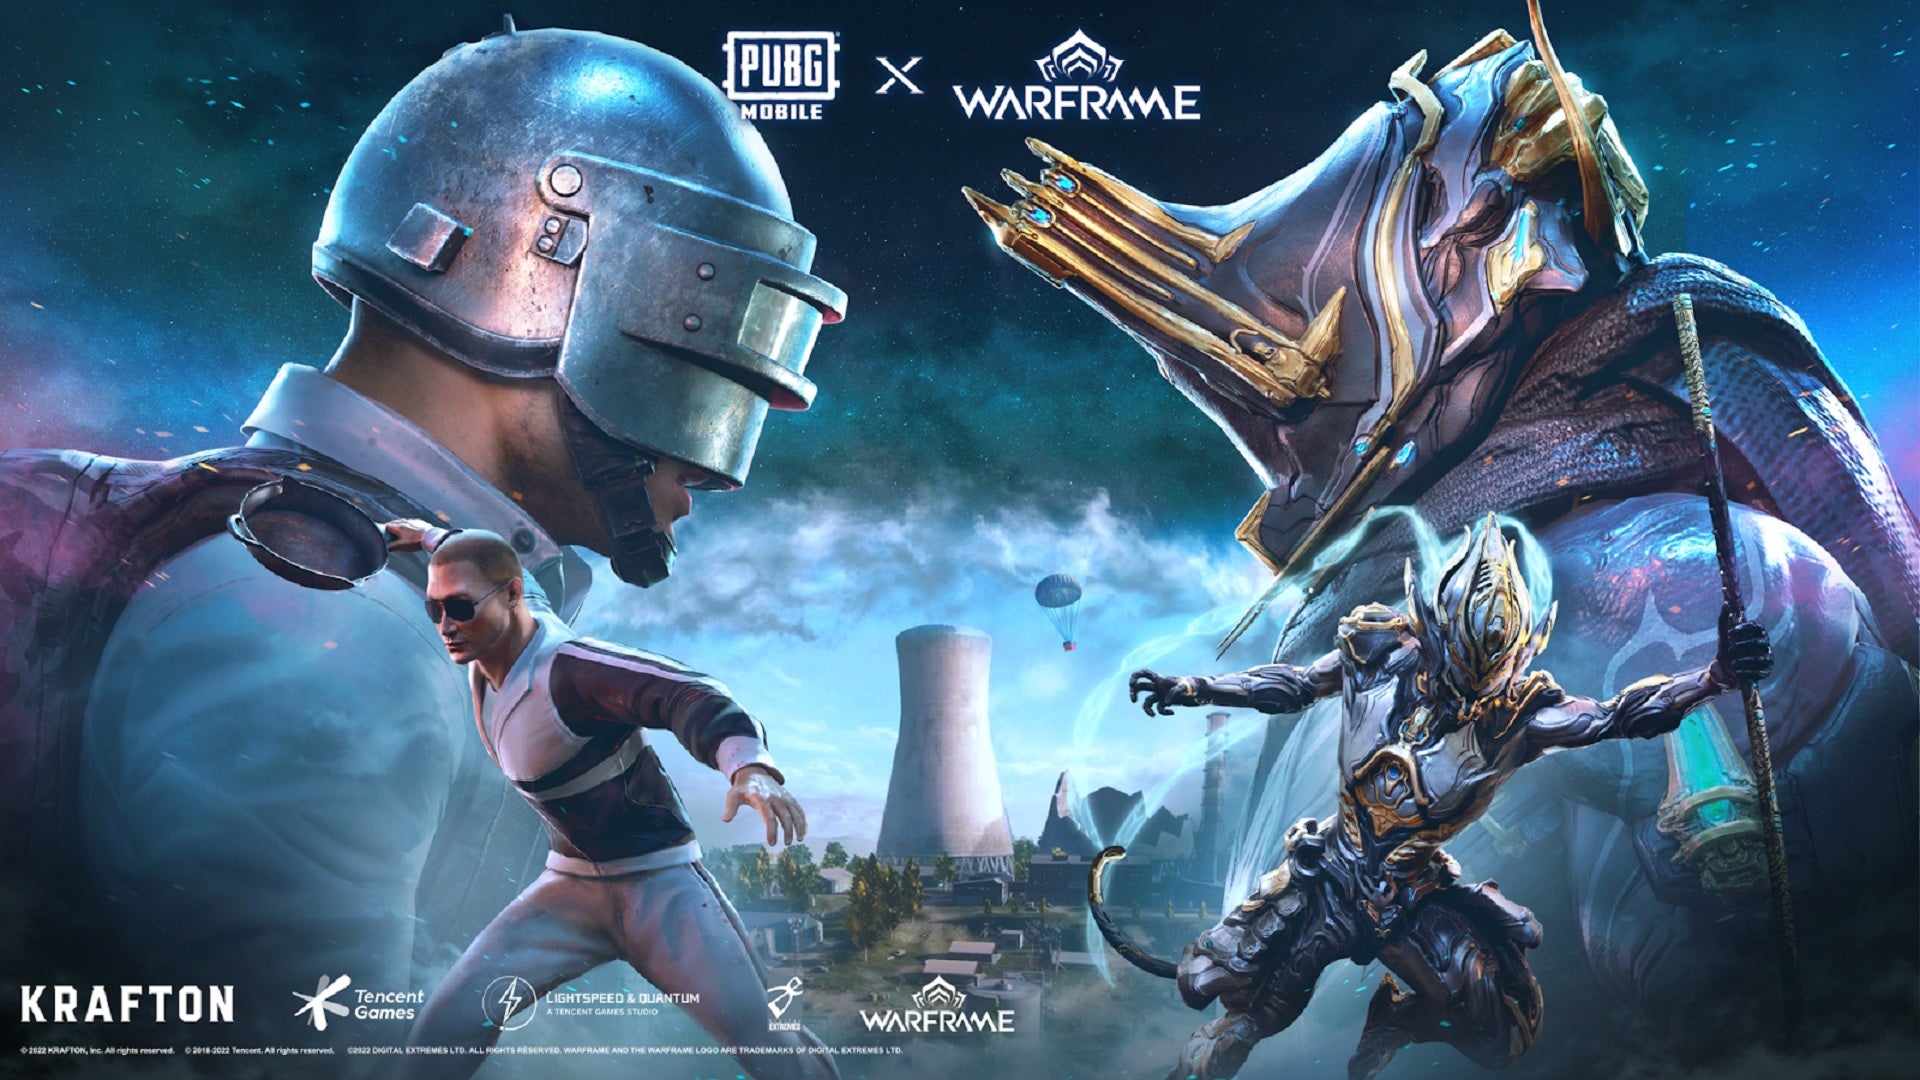 Image for PUBG Mobile to get Warframe skins in limited time crossover